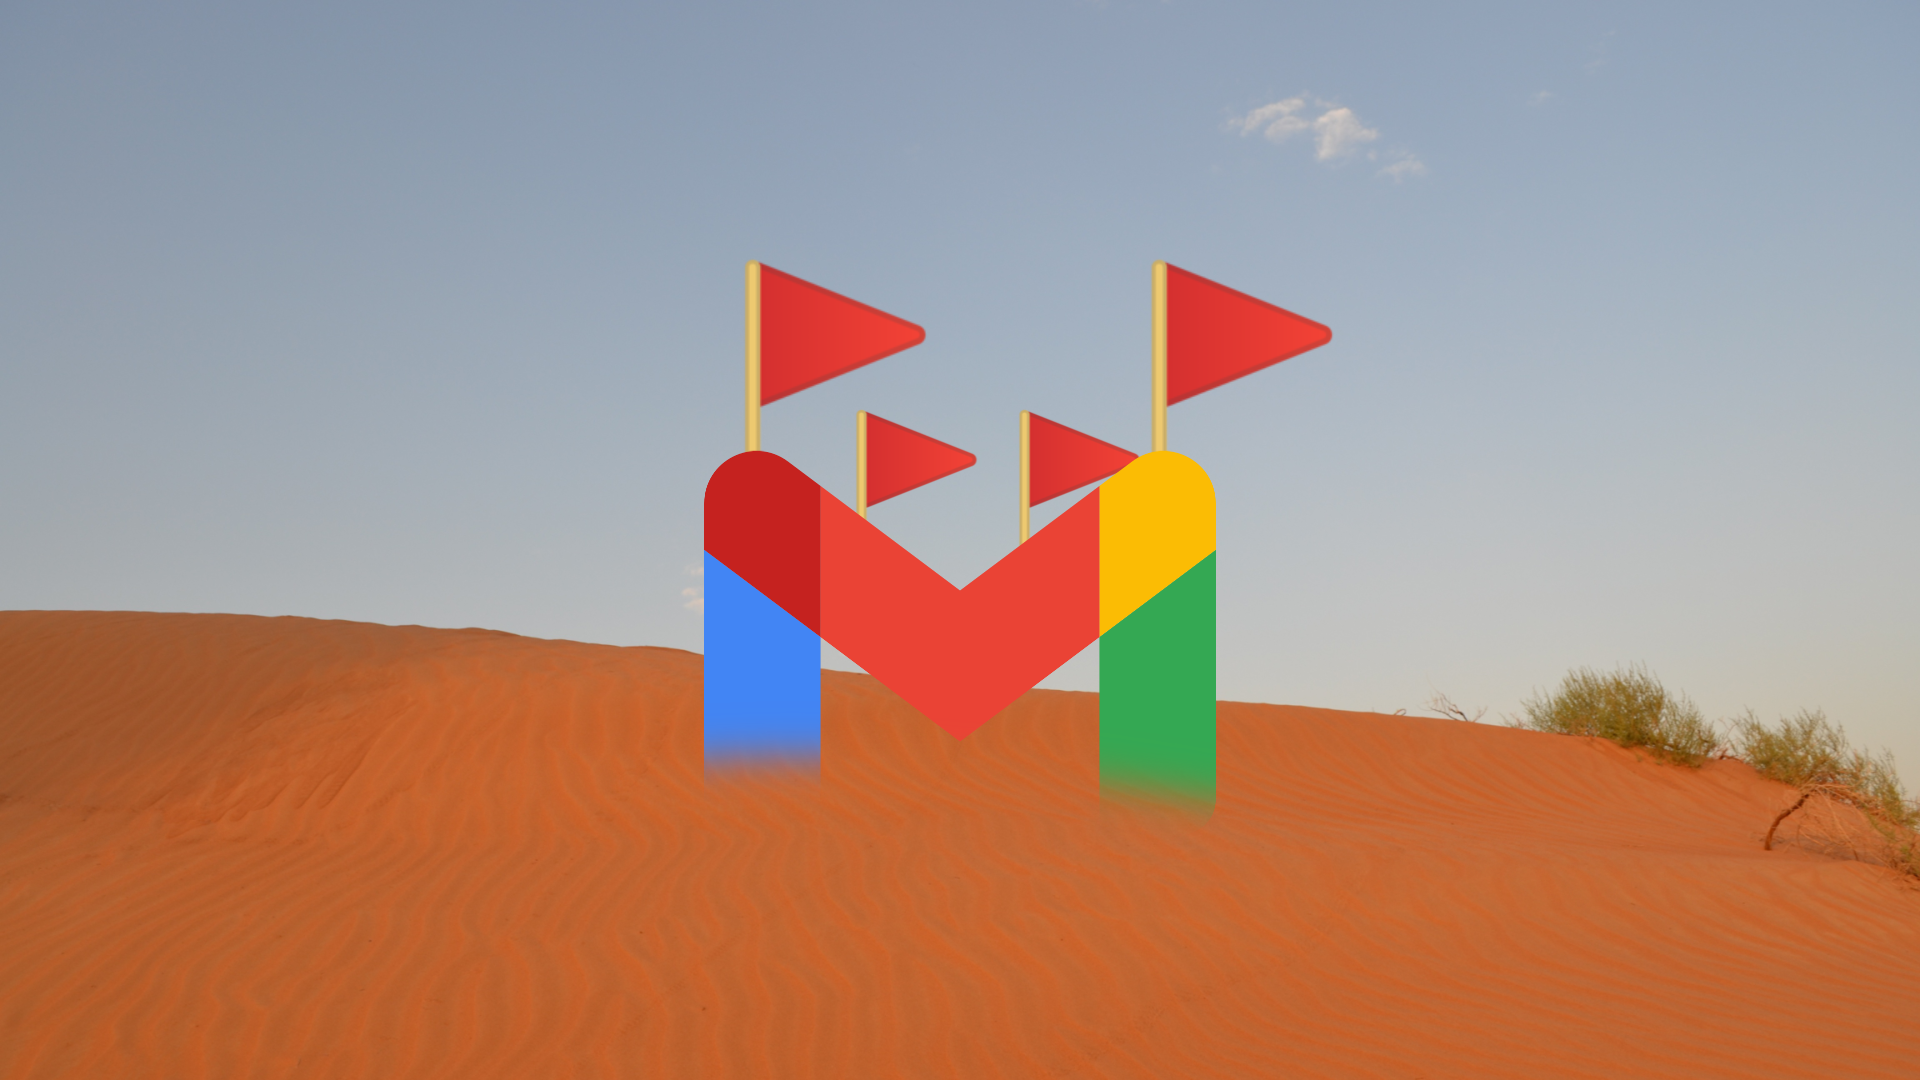 The Gmail logo with four red flags on top. The logo is set against a desert background with a blue sky instead of its usual background.